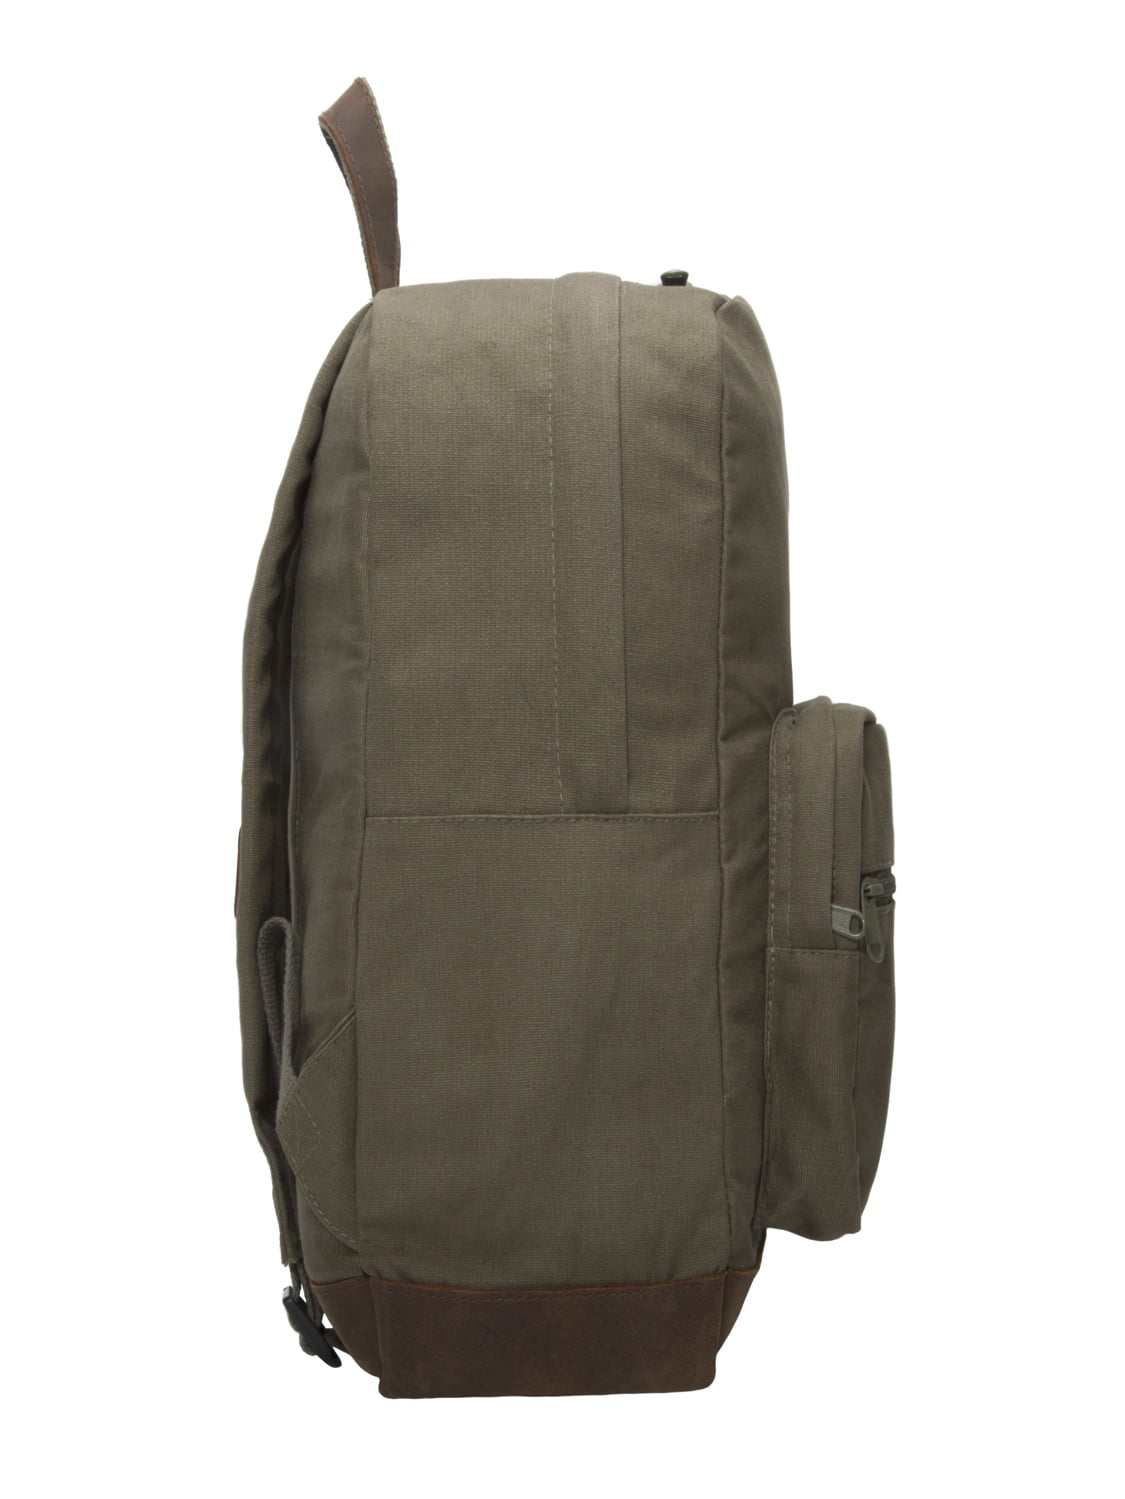 SWAT Team Text Canvas Teardrop Backpack with Leather Bottom Accents 